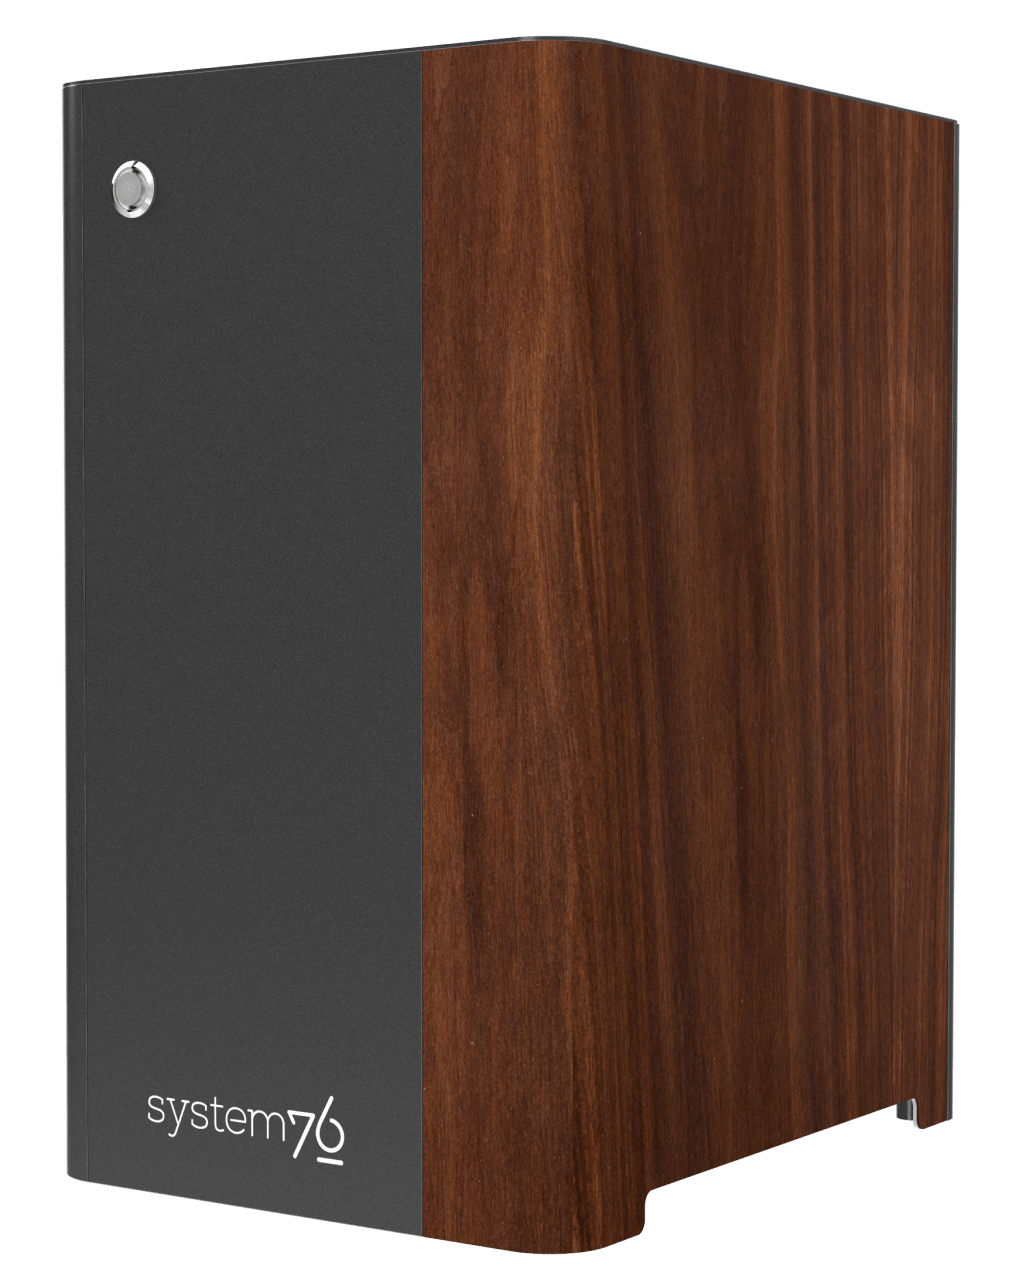 Side view of the machine showing walnut veneer component.